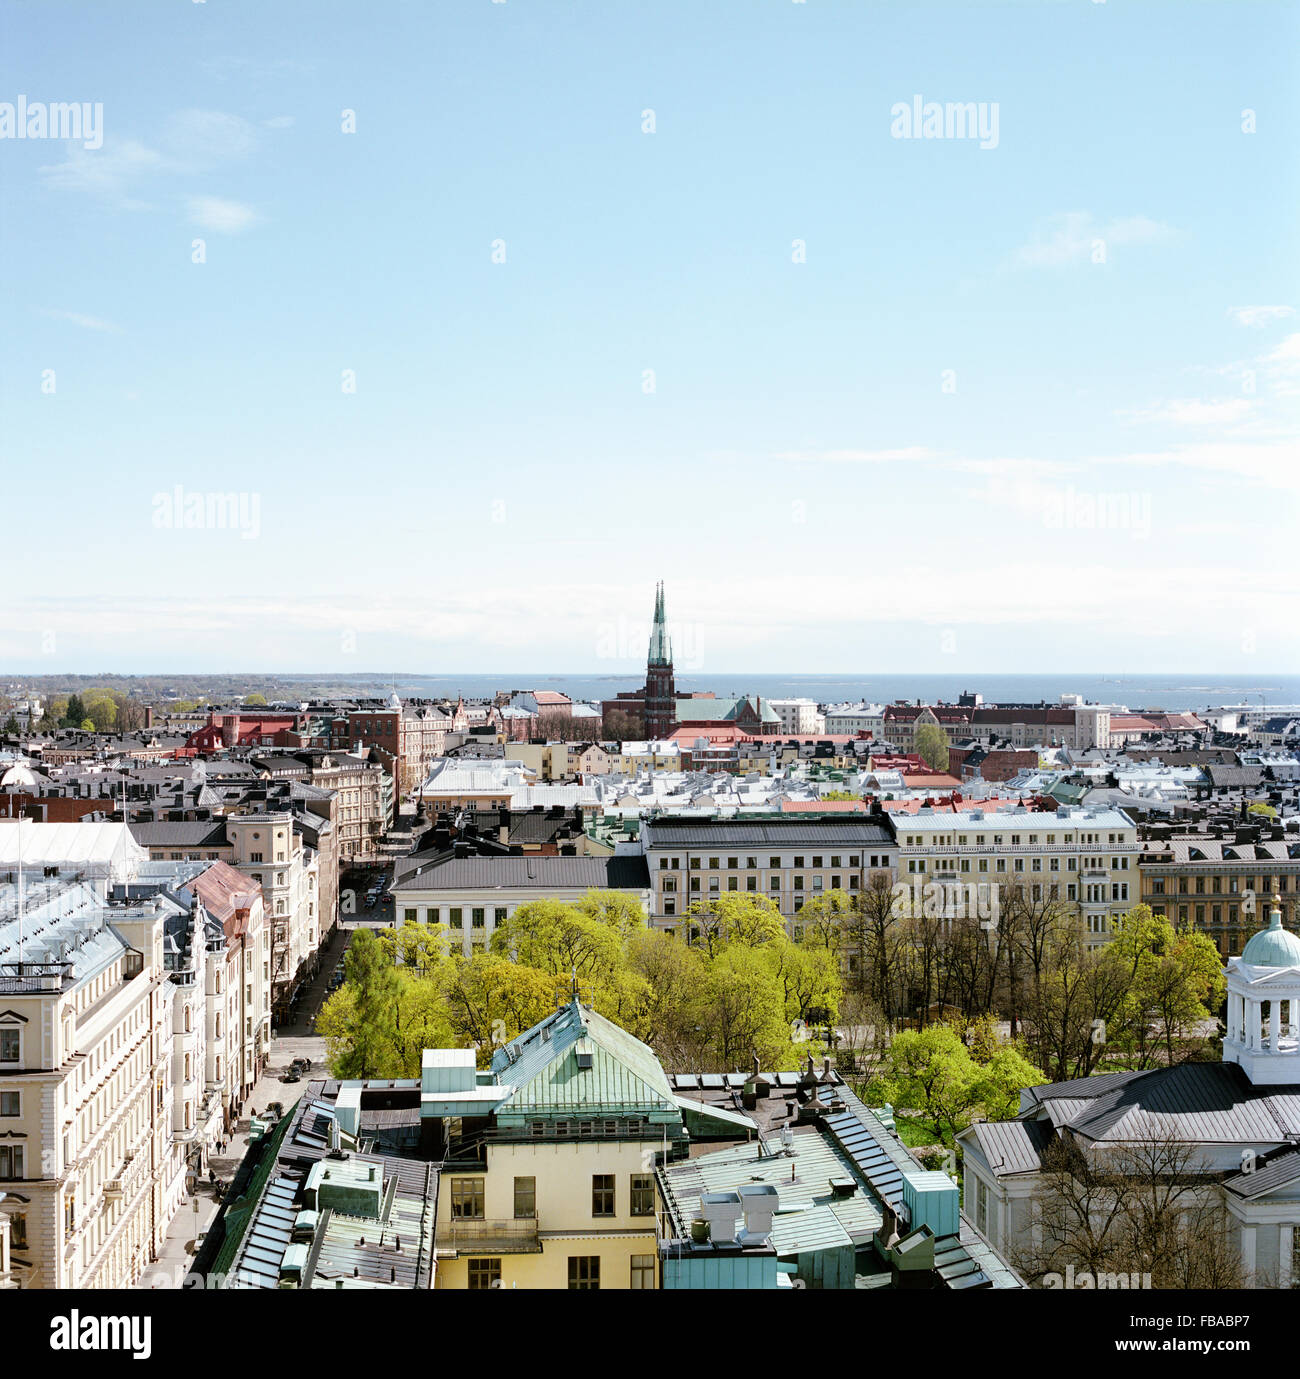 Finland. Helsinki, Elevated view of city Stock Photo